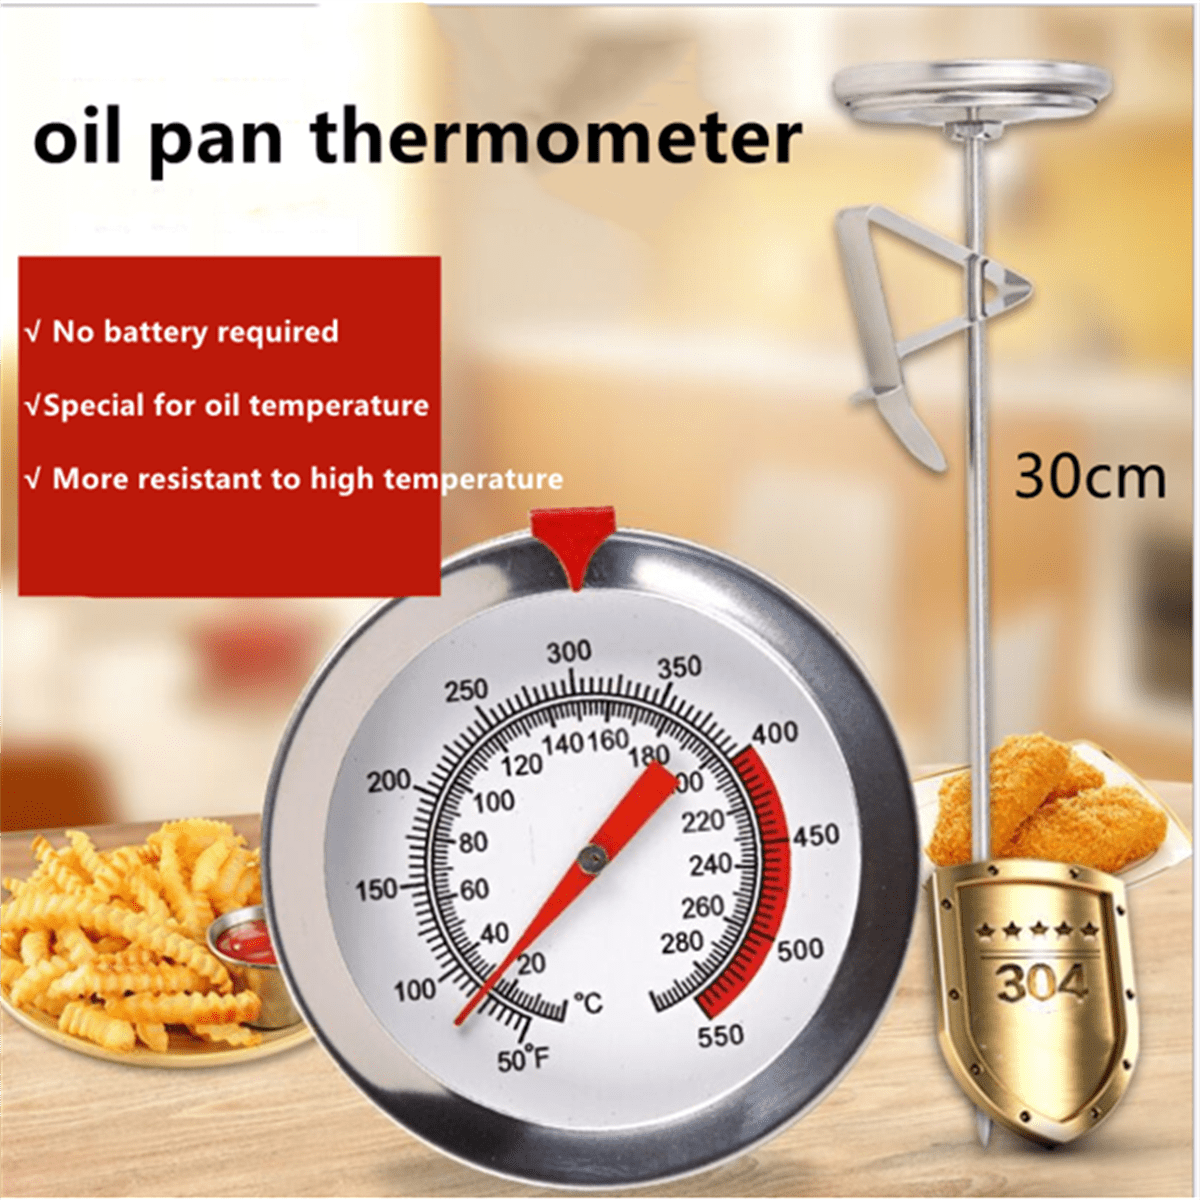 Candy Deep Fry Thermometer with Pot Clip 8 - Instant Read Food Thermometer Mechanical Meat Thermometer for Grilling Candle Making Thermometer Baking T